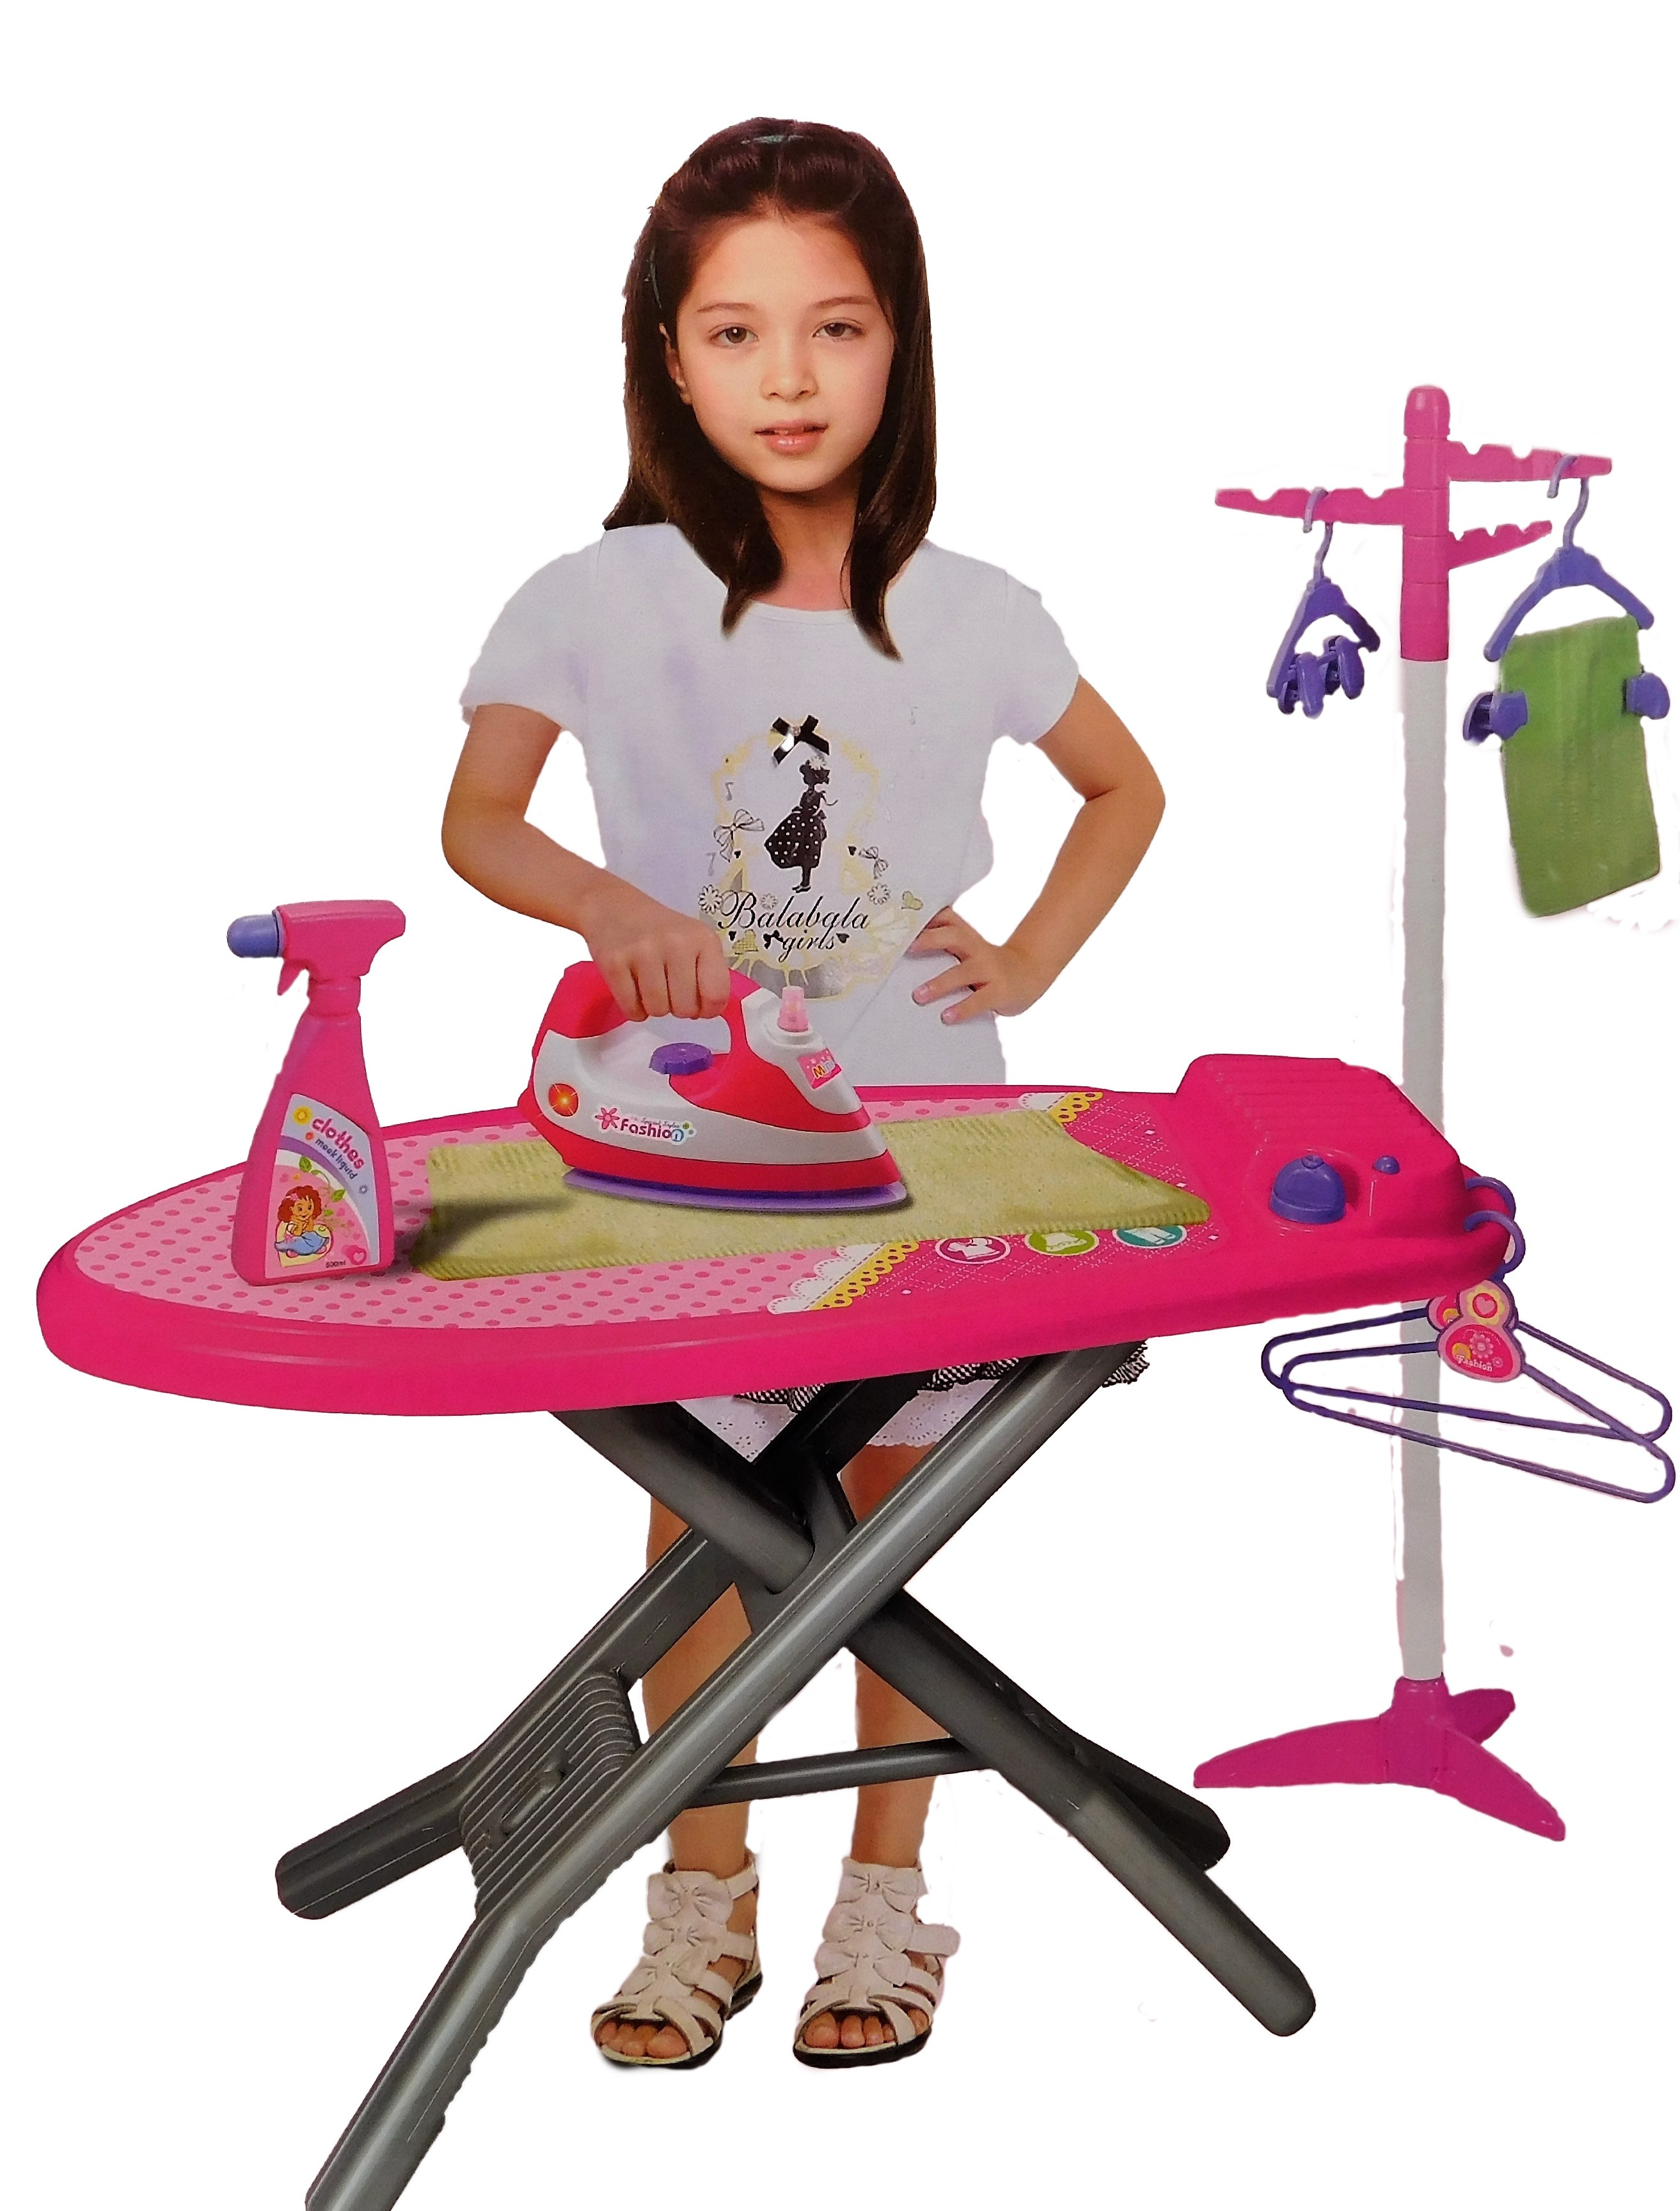 Children S Toy Pretend Play Iron And Ironing Board With Laundry